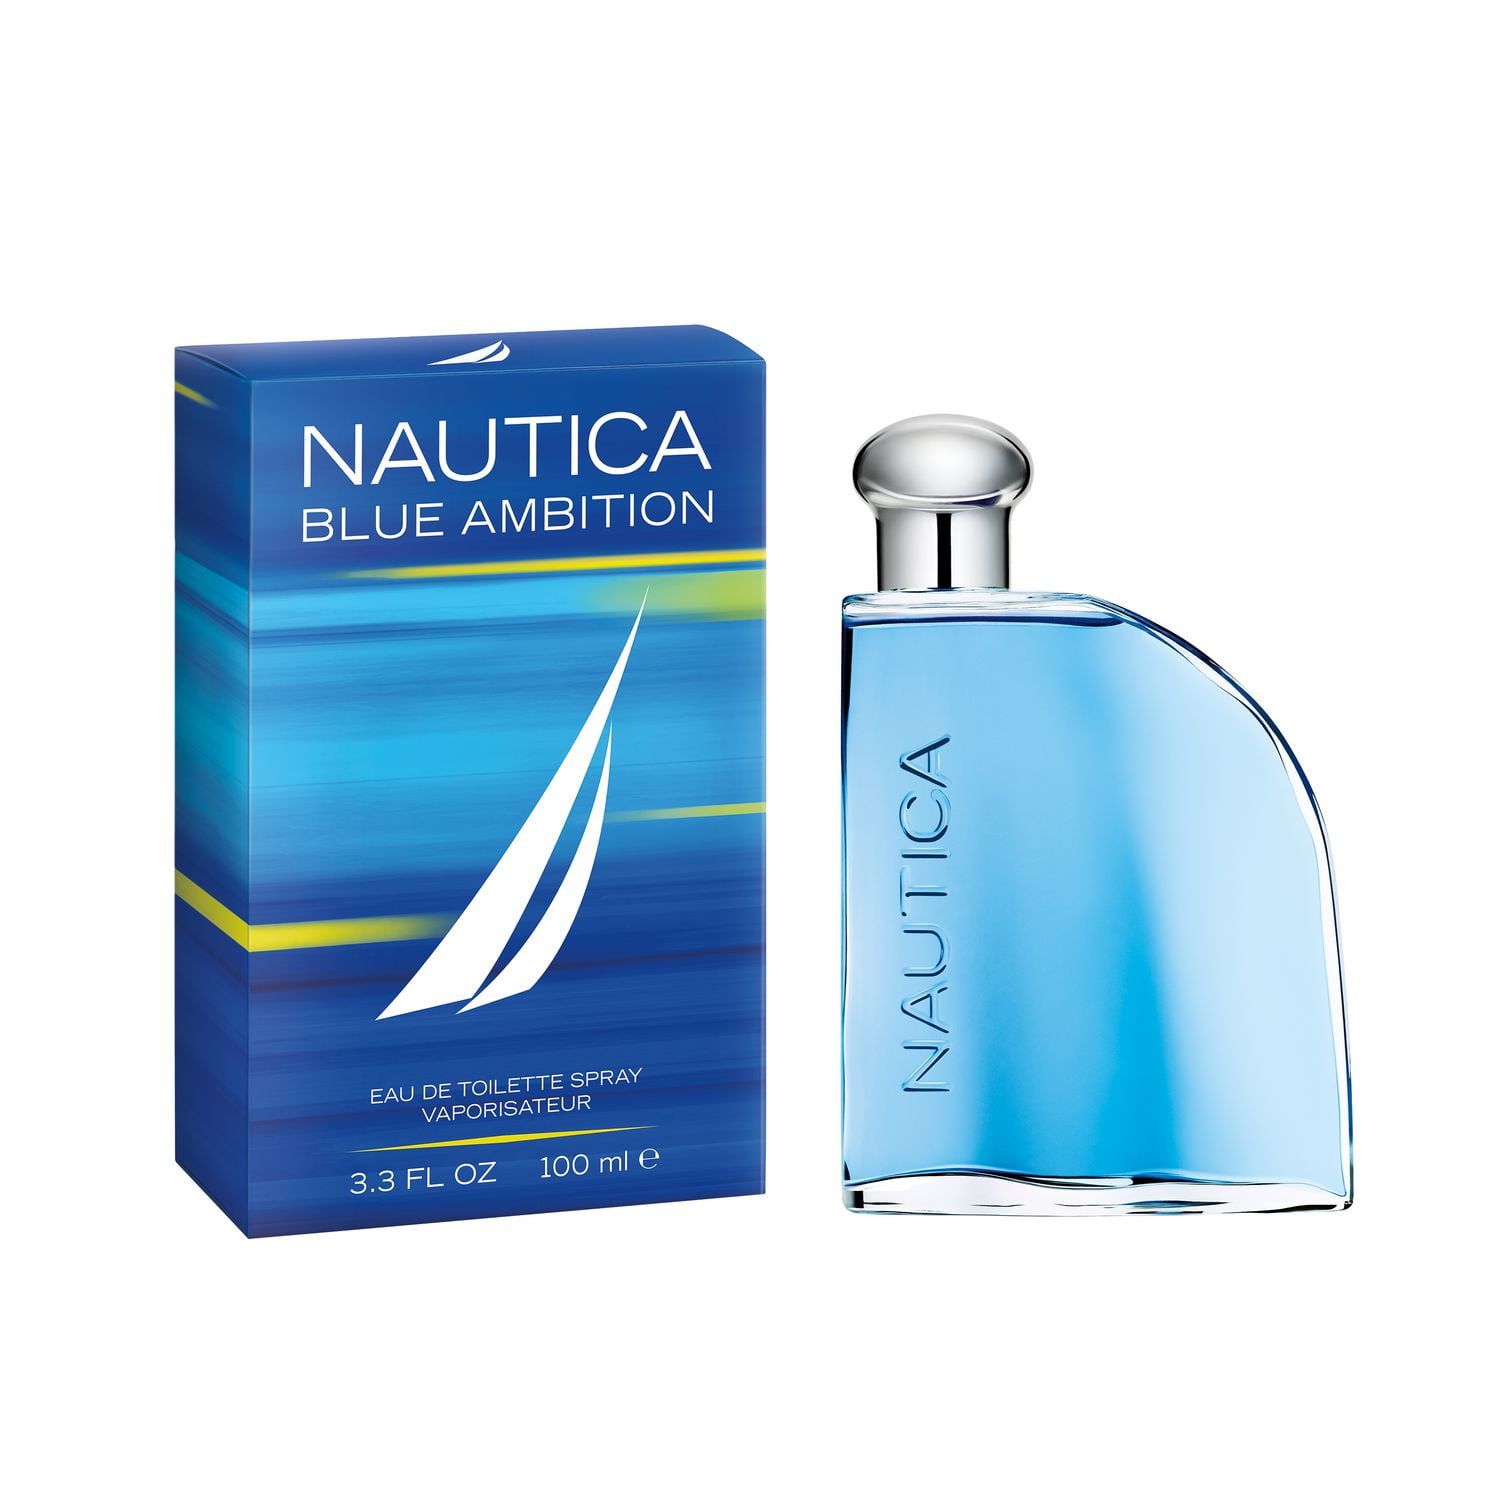 Nautica Blue Eau De Toilette for Men, Invigorating, Fresh Scent - Woody,  Fruity Notes of Pineapple, Water Lily, and Sandalwood, 100ml, Everyday  Cologne 